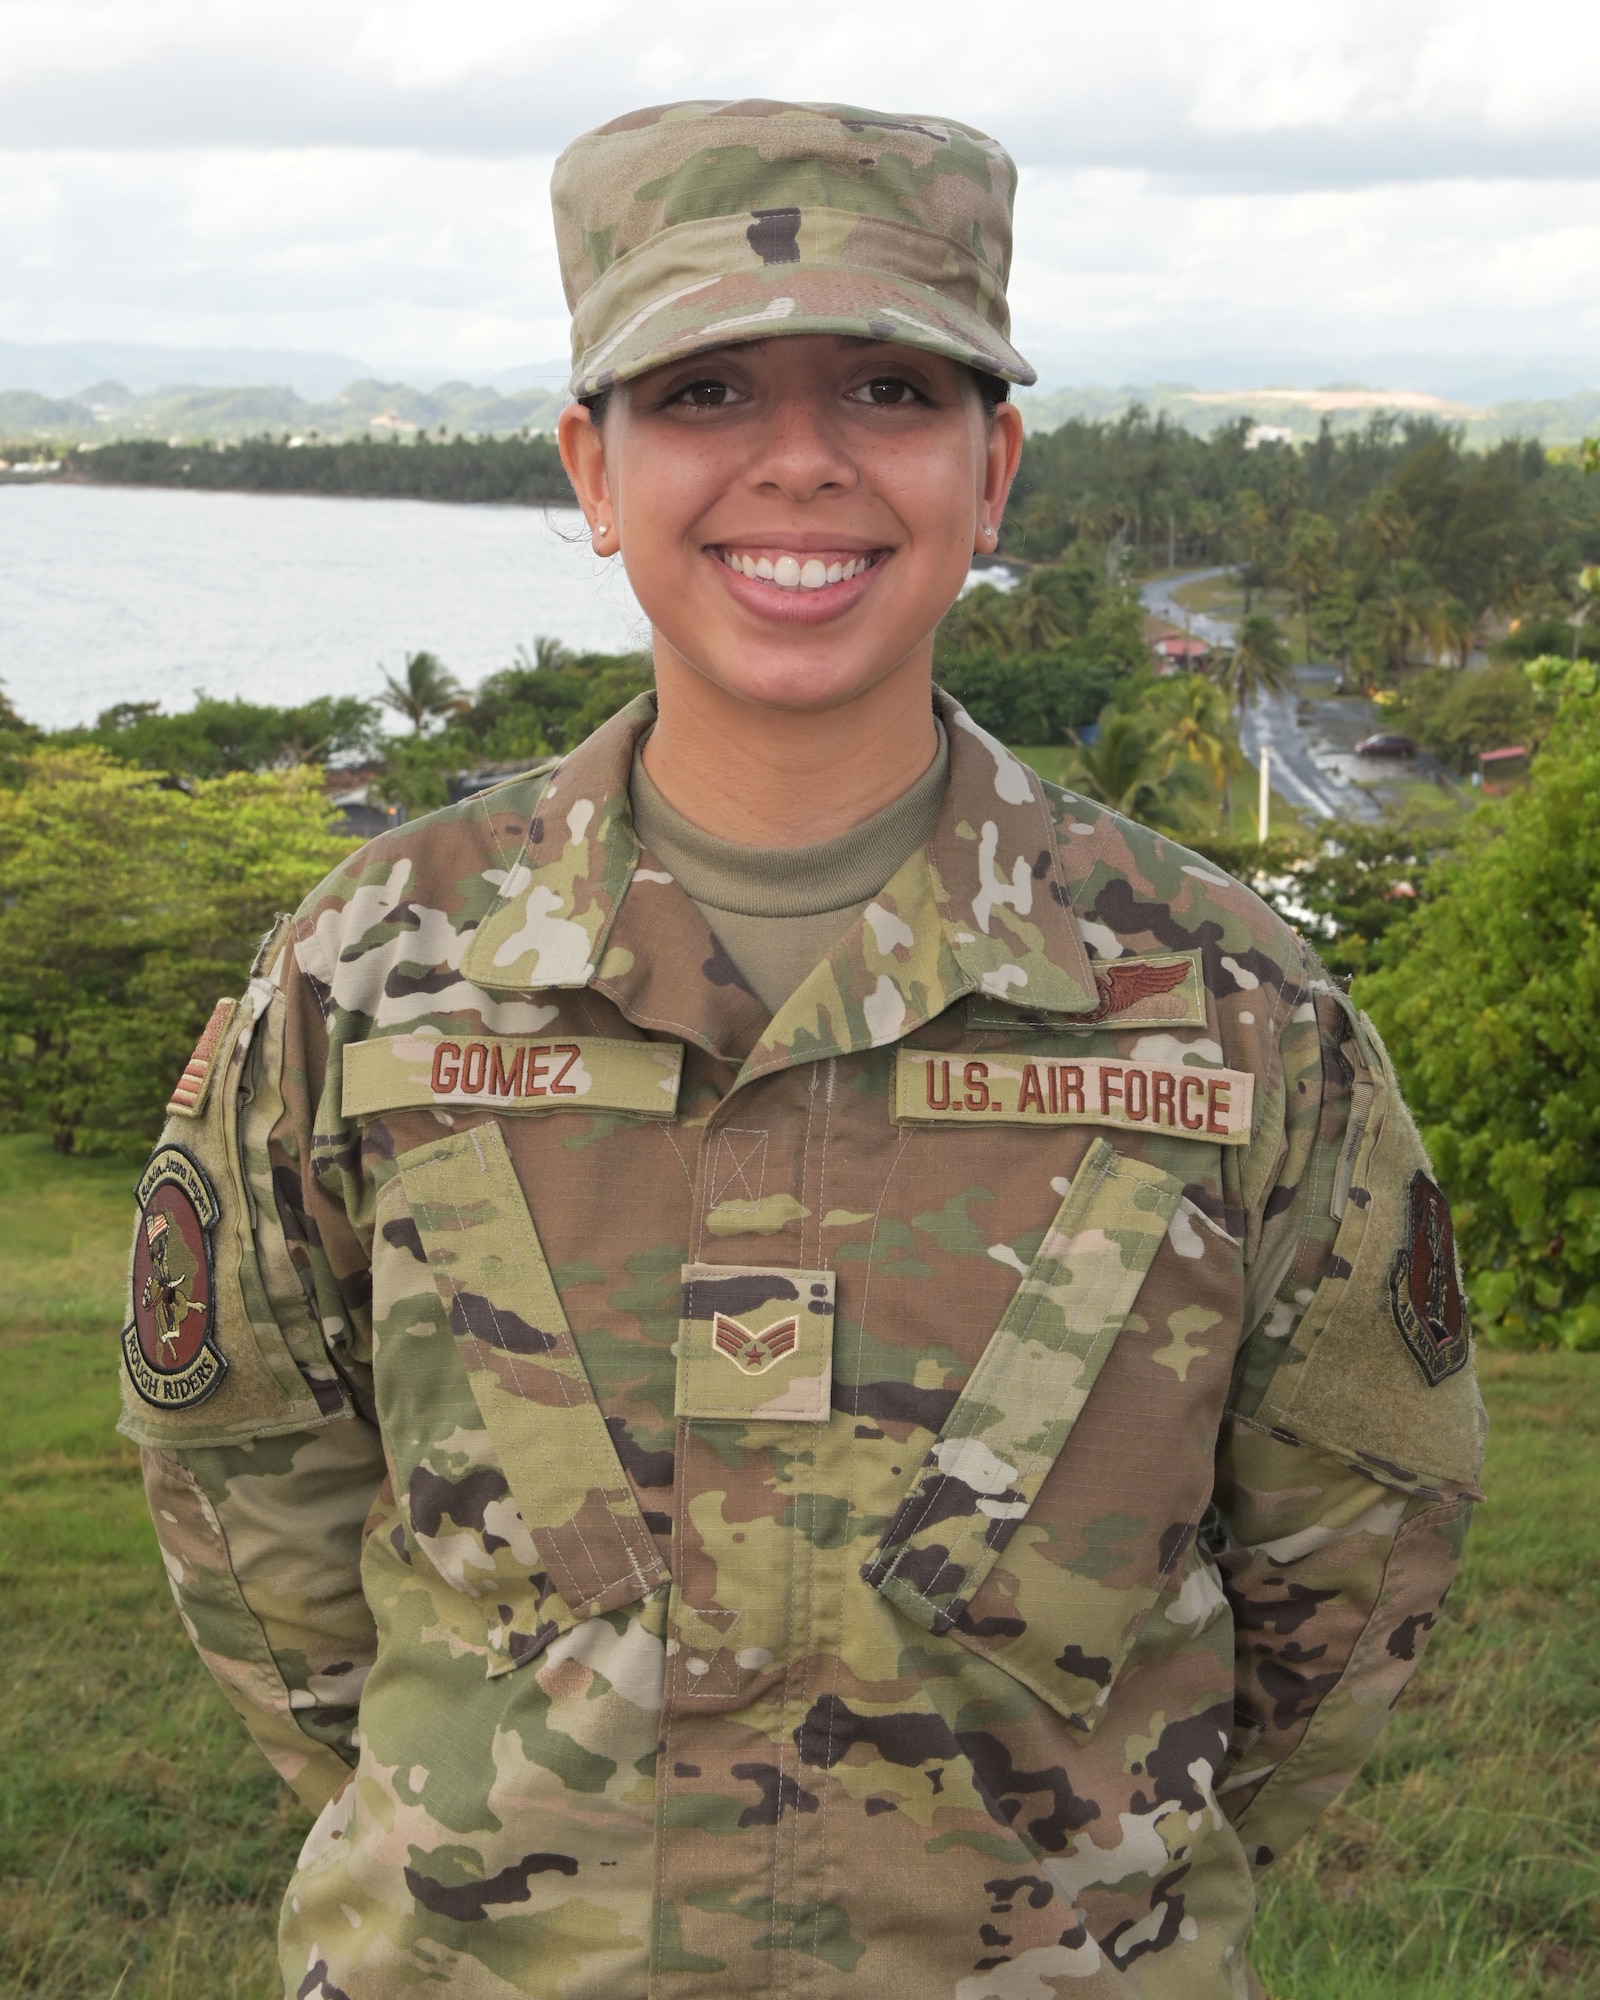 U.S. Air Force Senior Airman Amanda Gomez, an airborne missions systems operator with the 156th Operations Group, Puerto Rico Air National Guard, poses for a picture at Punta Salinas Air National Guard Station, Puerto Rico, June 3, 2021. (U.S. Air National Guard photo by Staff Sgt. Eliezer Soto)